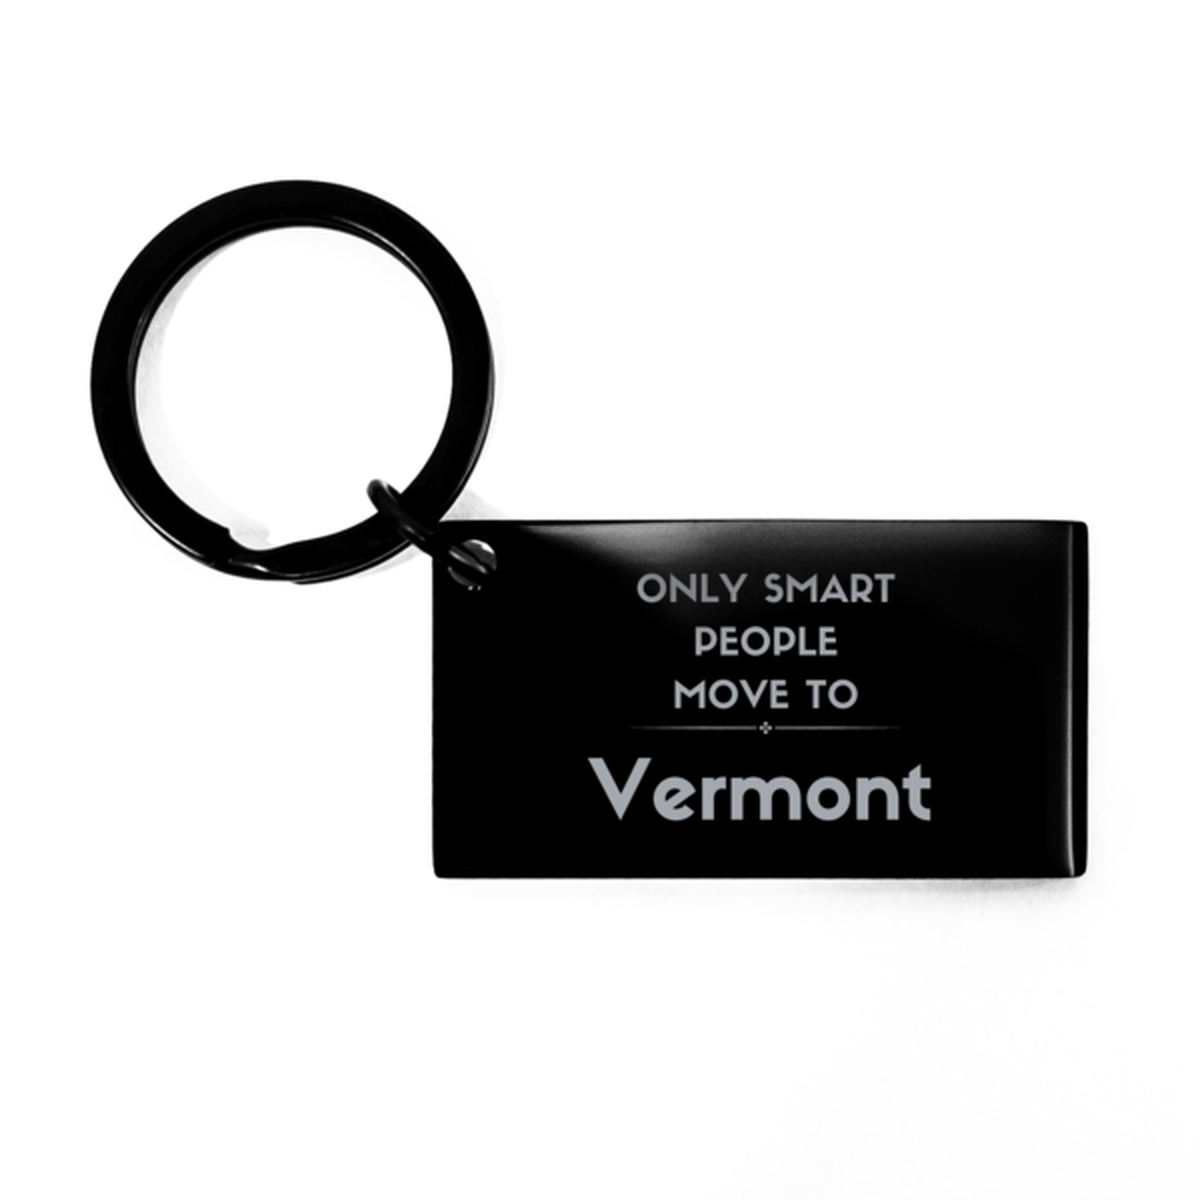 Only smart people move to Vermont Keychain, Gag Gifts For Vermont, Move to Vermont Gifts for Friends Coworker Funny Saying Quote